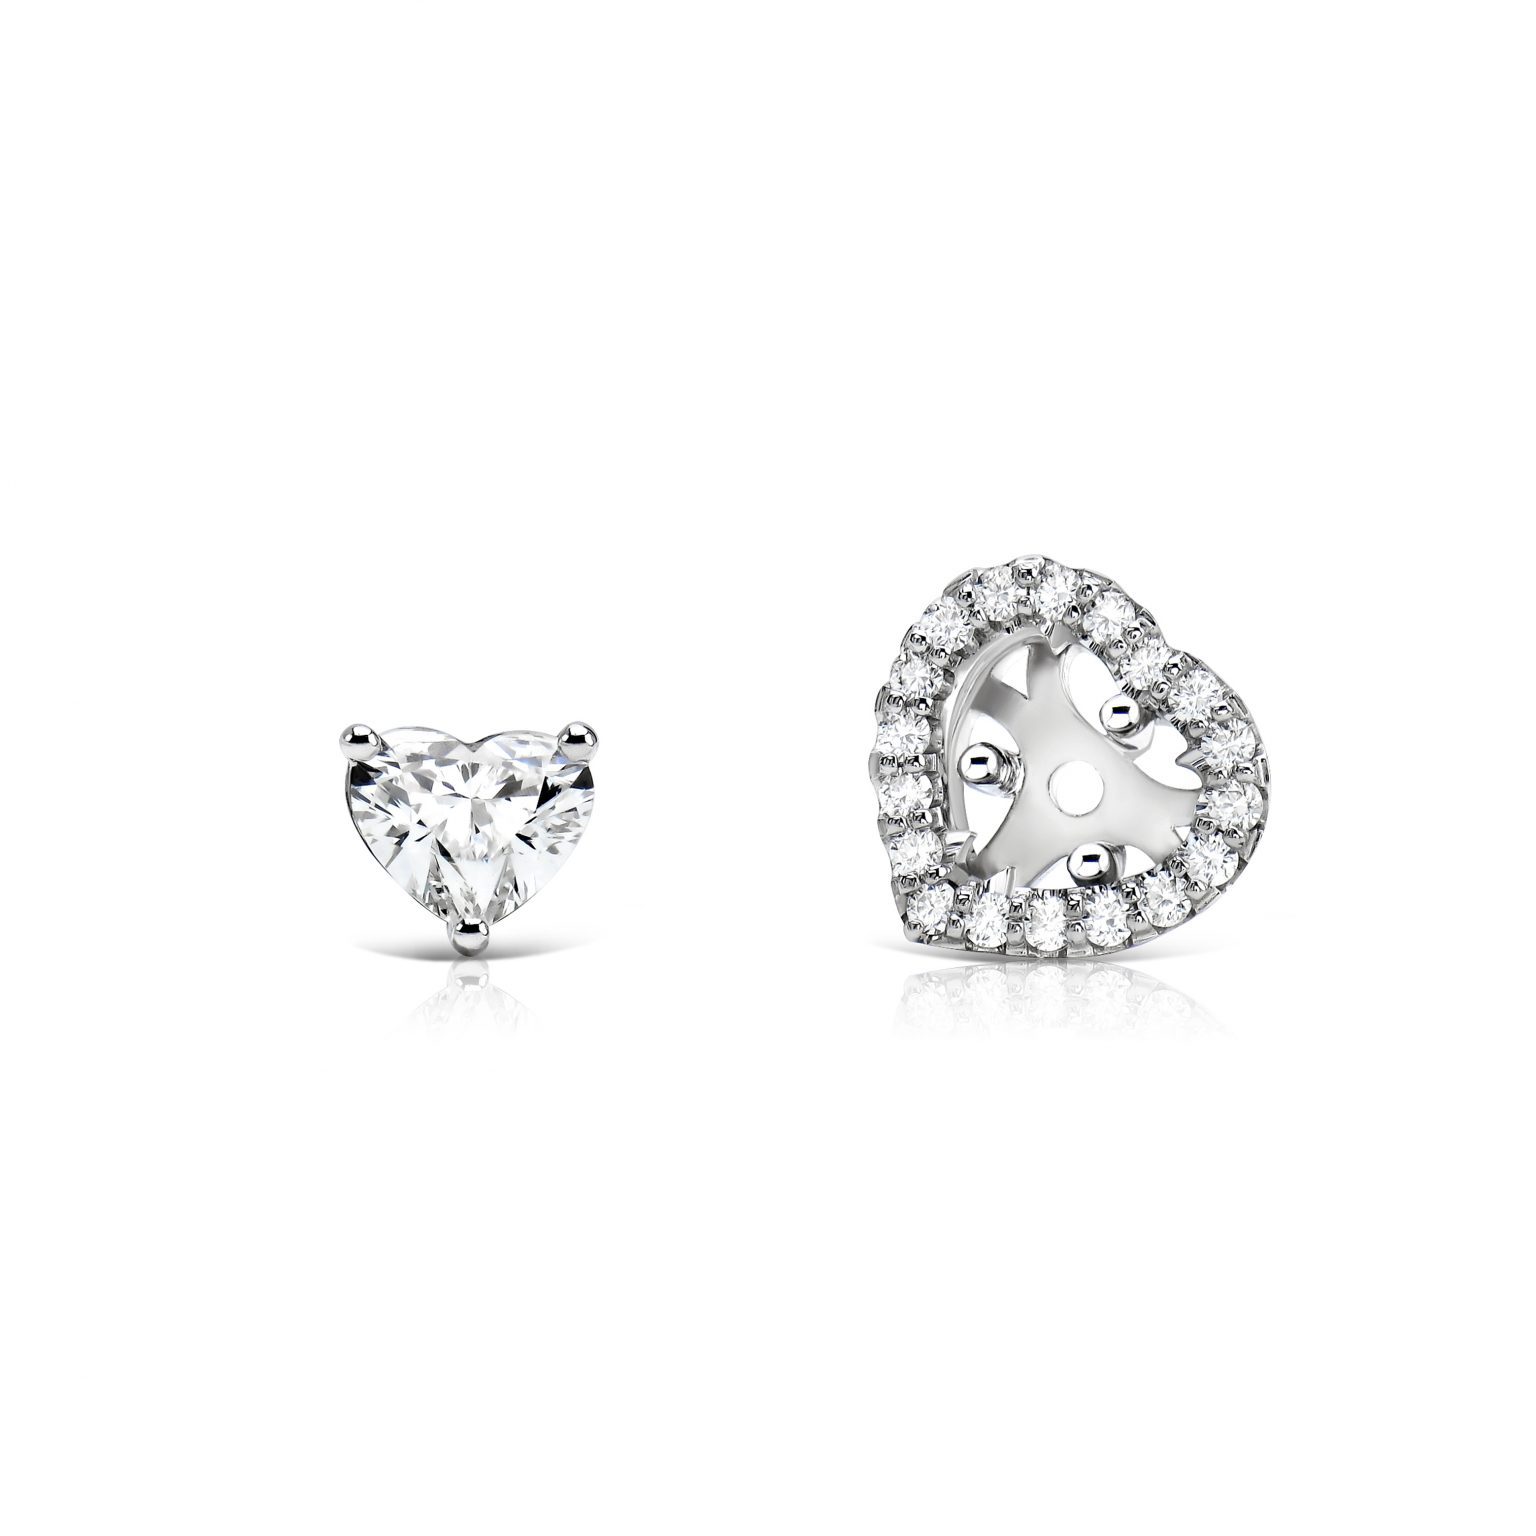 Diamond stud earrings-transformers with a total weight of 2.27 ct